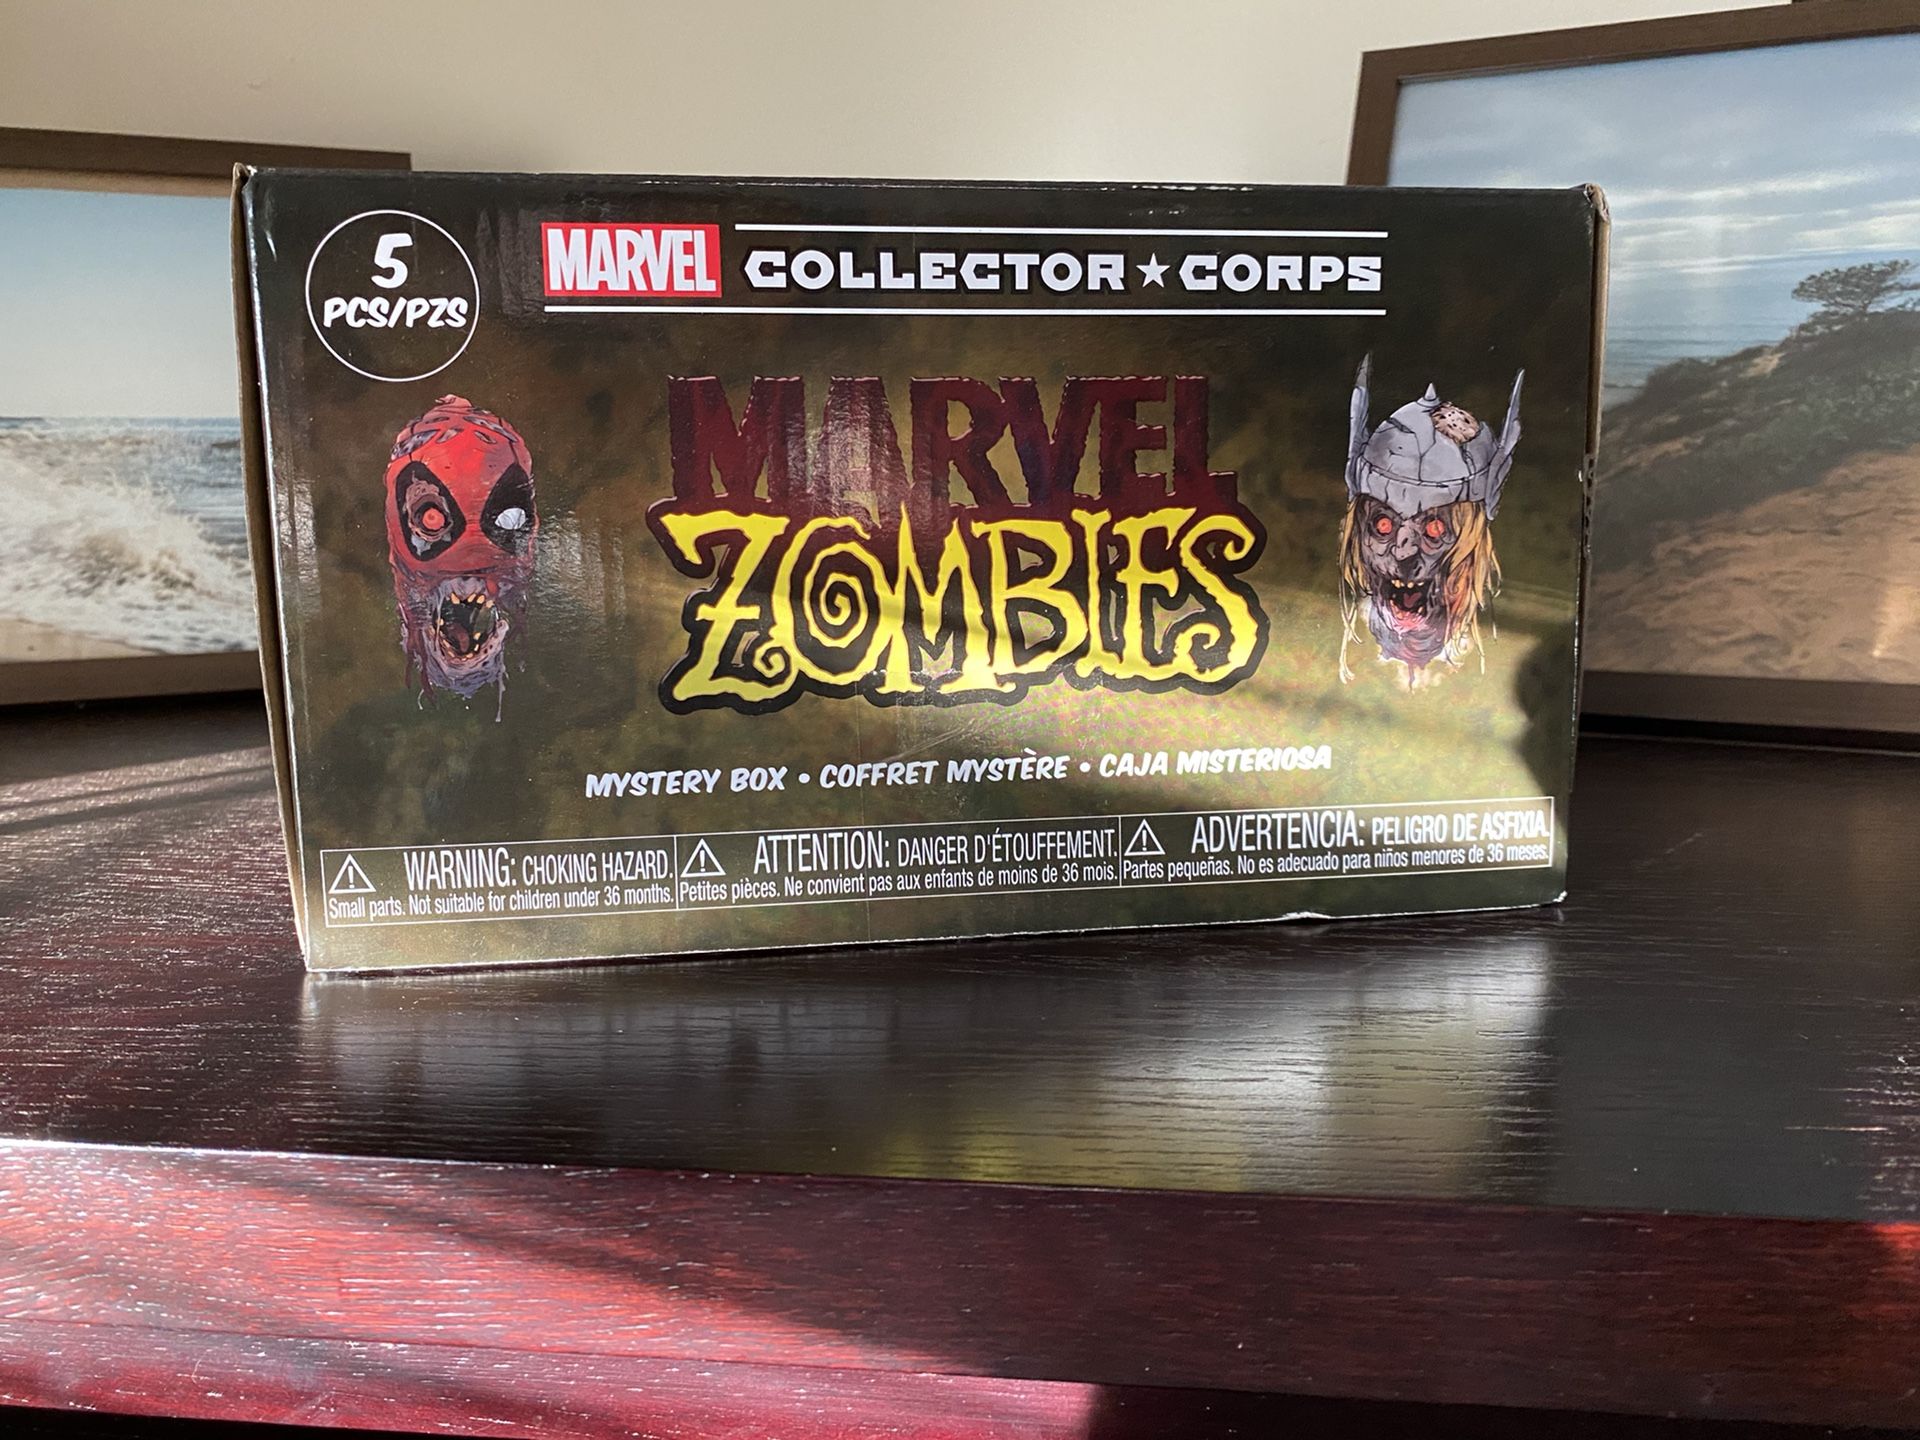 Marvel collector corps zombie box (Full size XL)